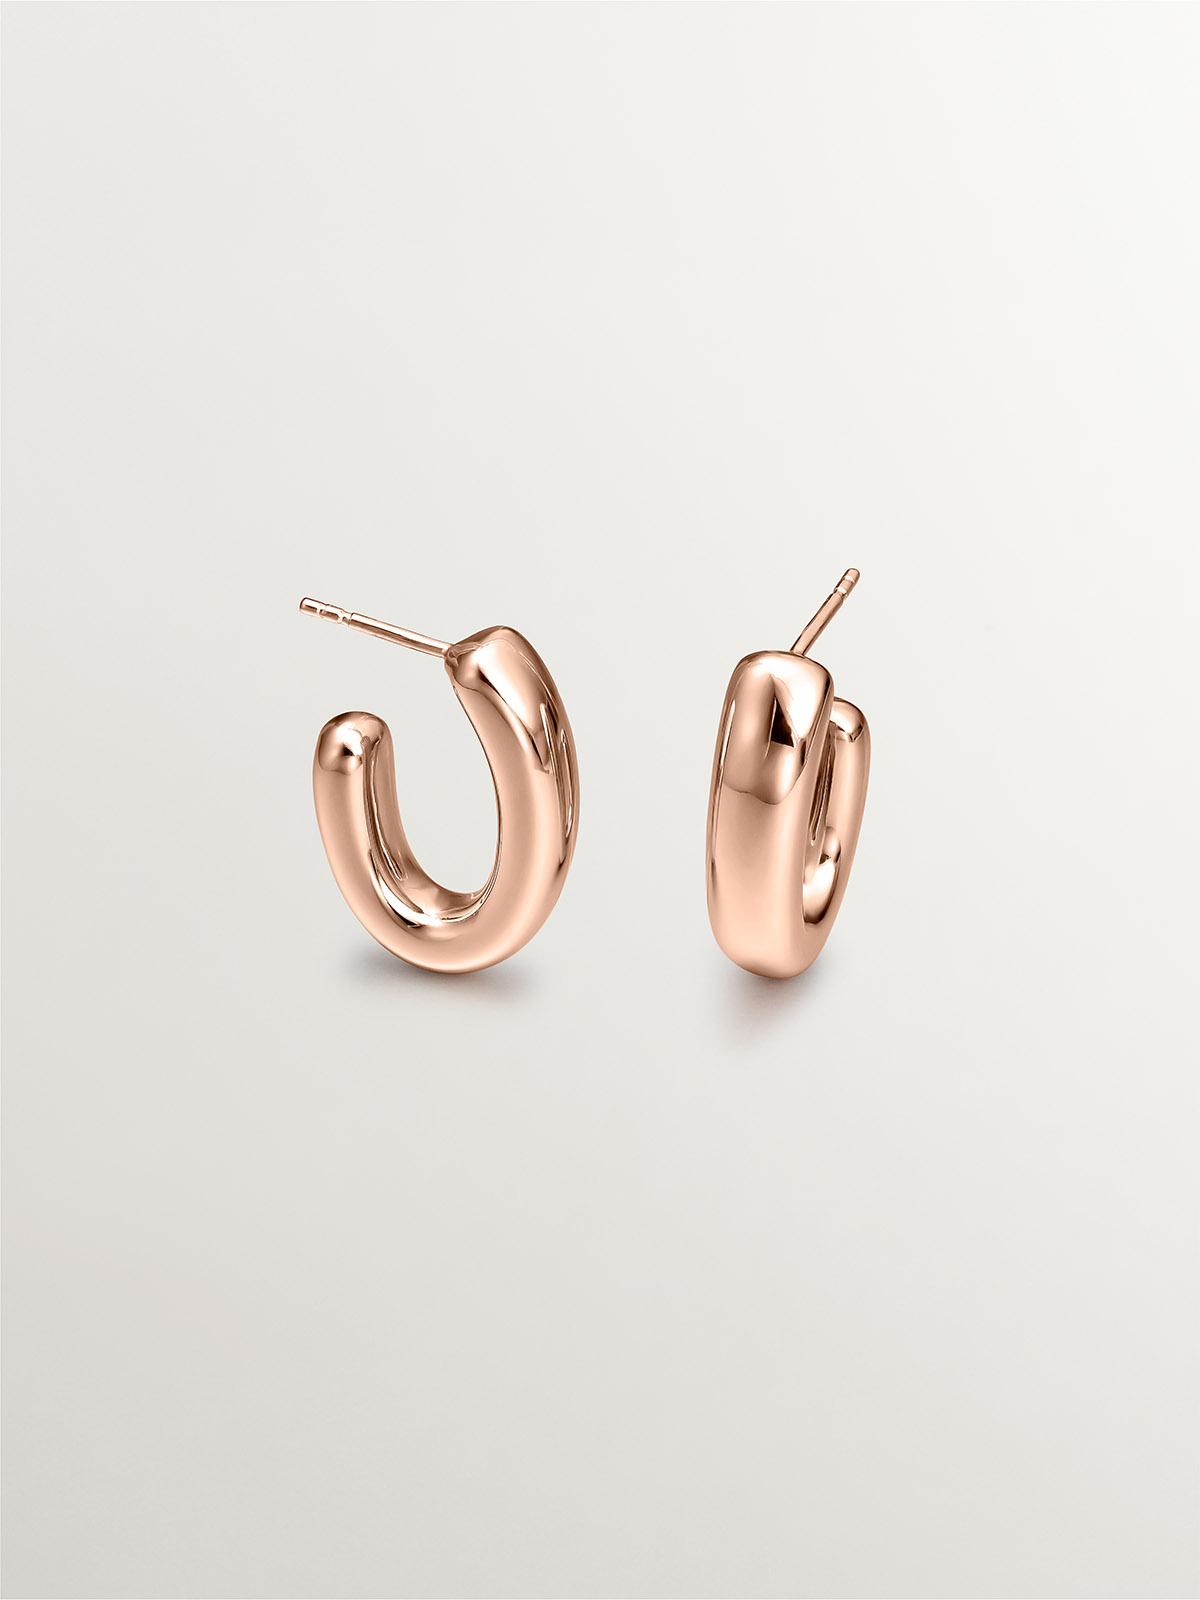 Small oval hoop earrings made of 925 silver plated in 18K rose gold.